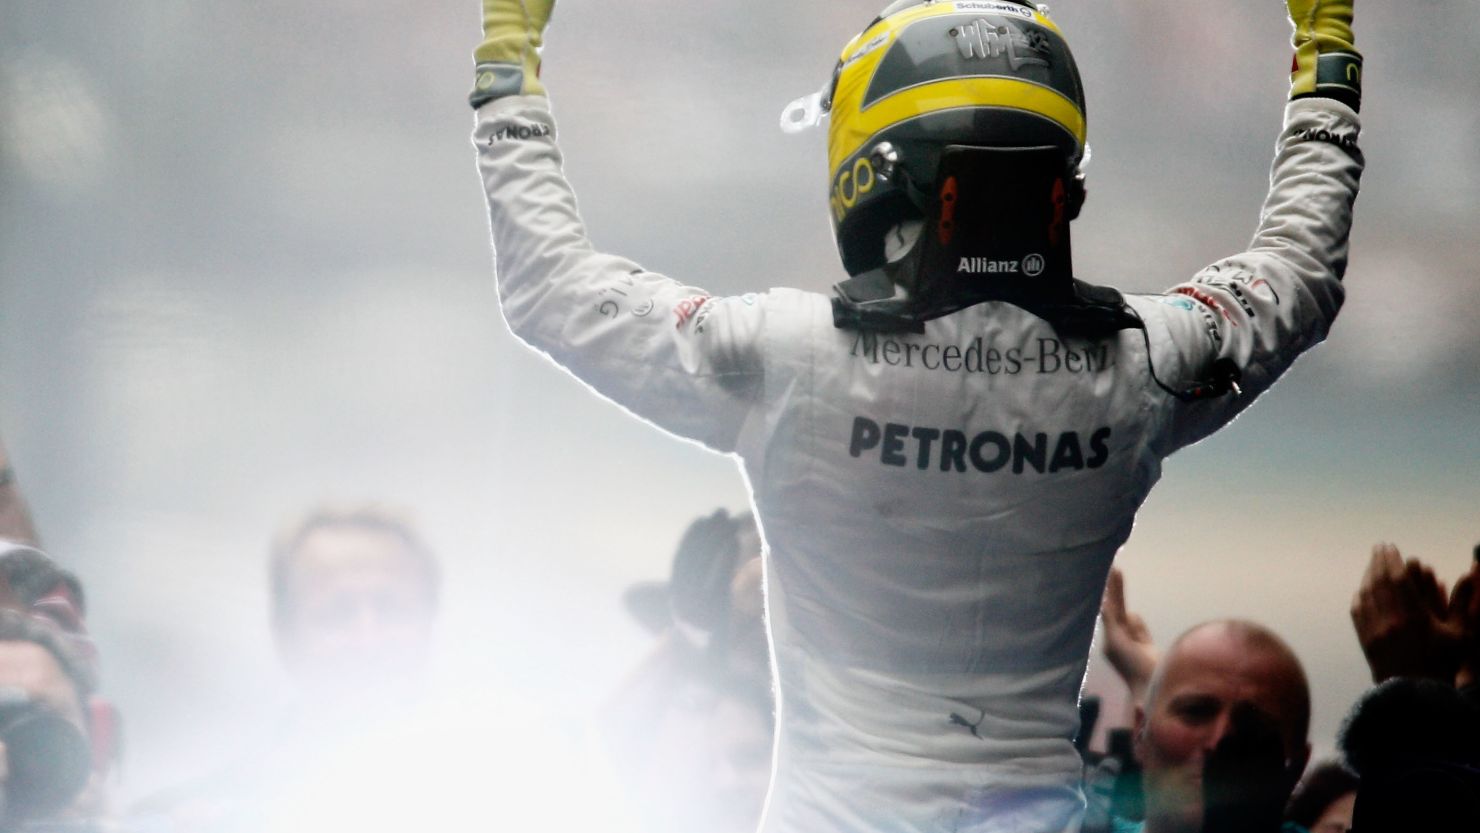 Nico Rosberg celebrates his superb victory for Mercedes in the Chinese Grand Prix.